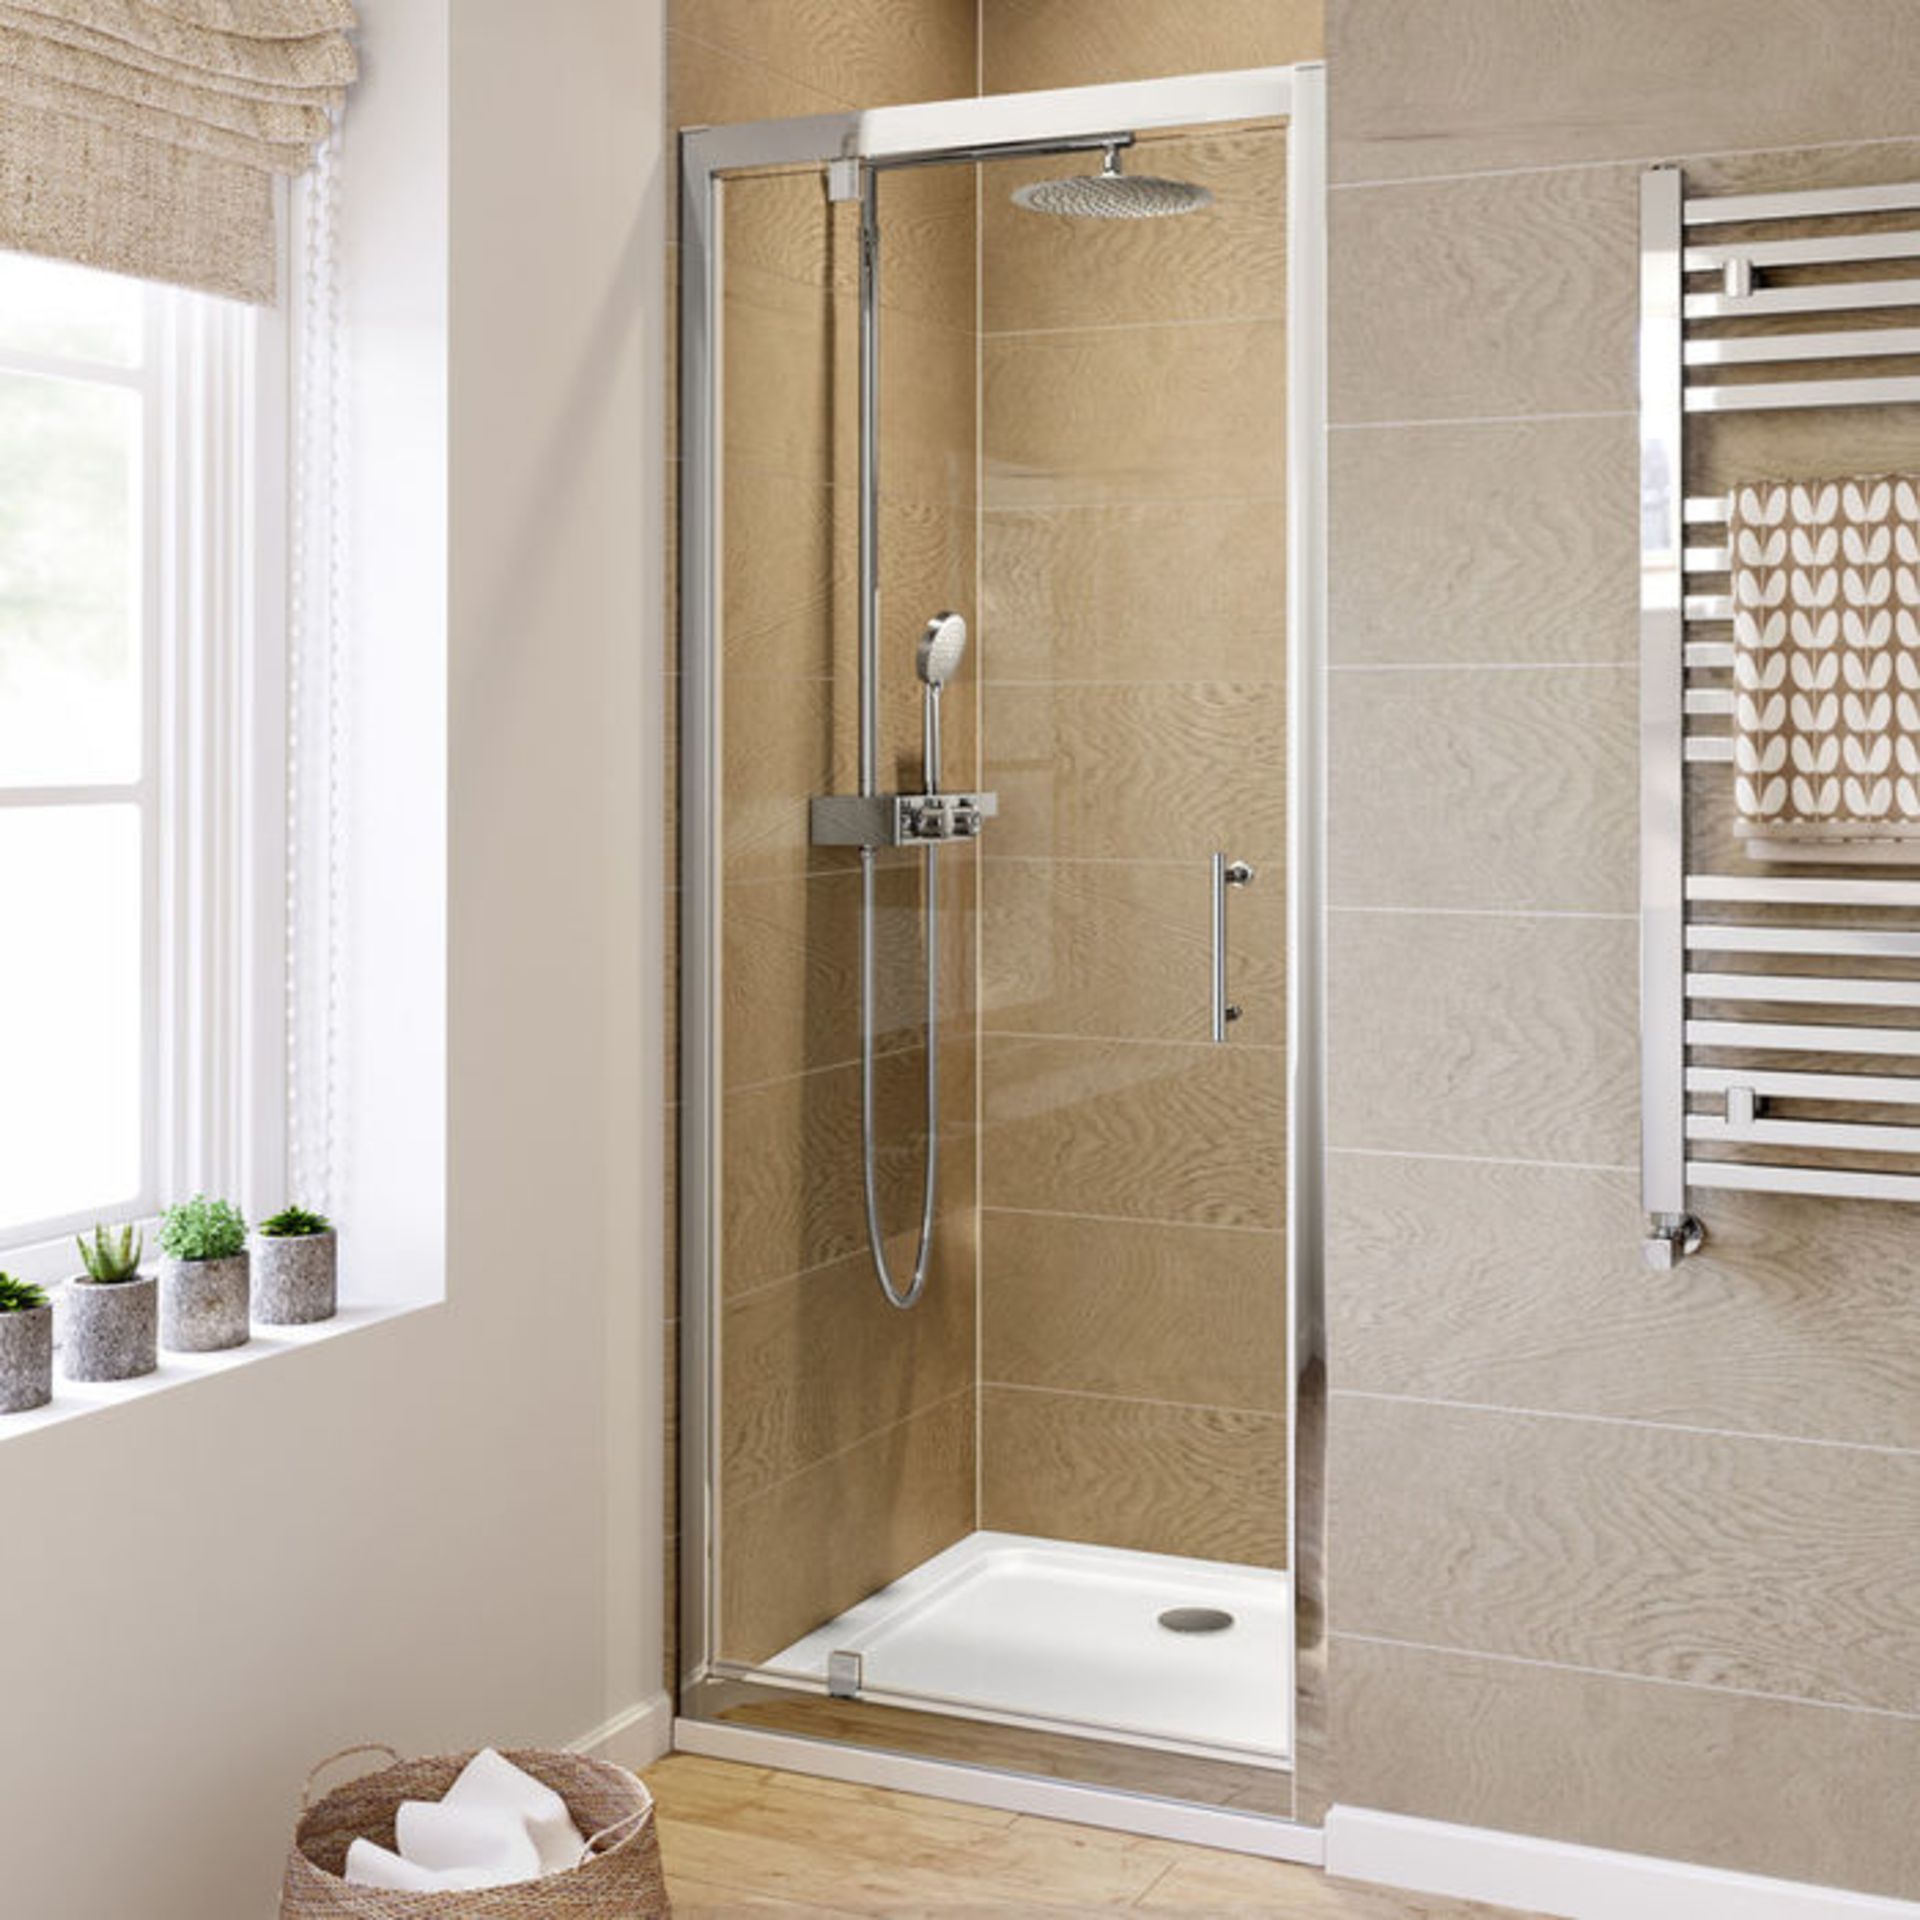 New (Ref144) 760 mm 6 mm - Elements Pivot 760 mm Shower Door 6 mm. Safety Glass Fully Waterproof Te - Image 2 of 2